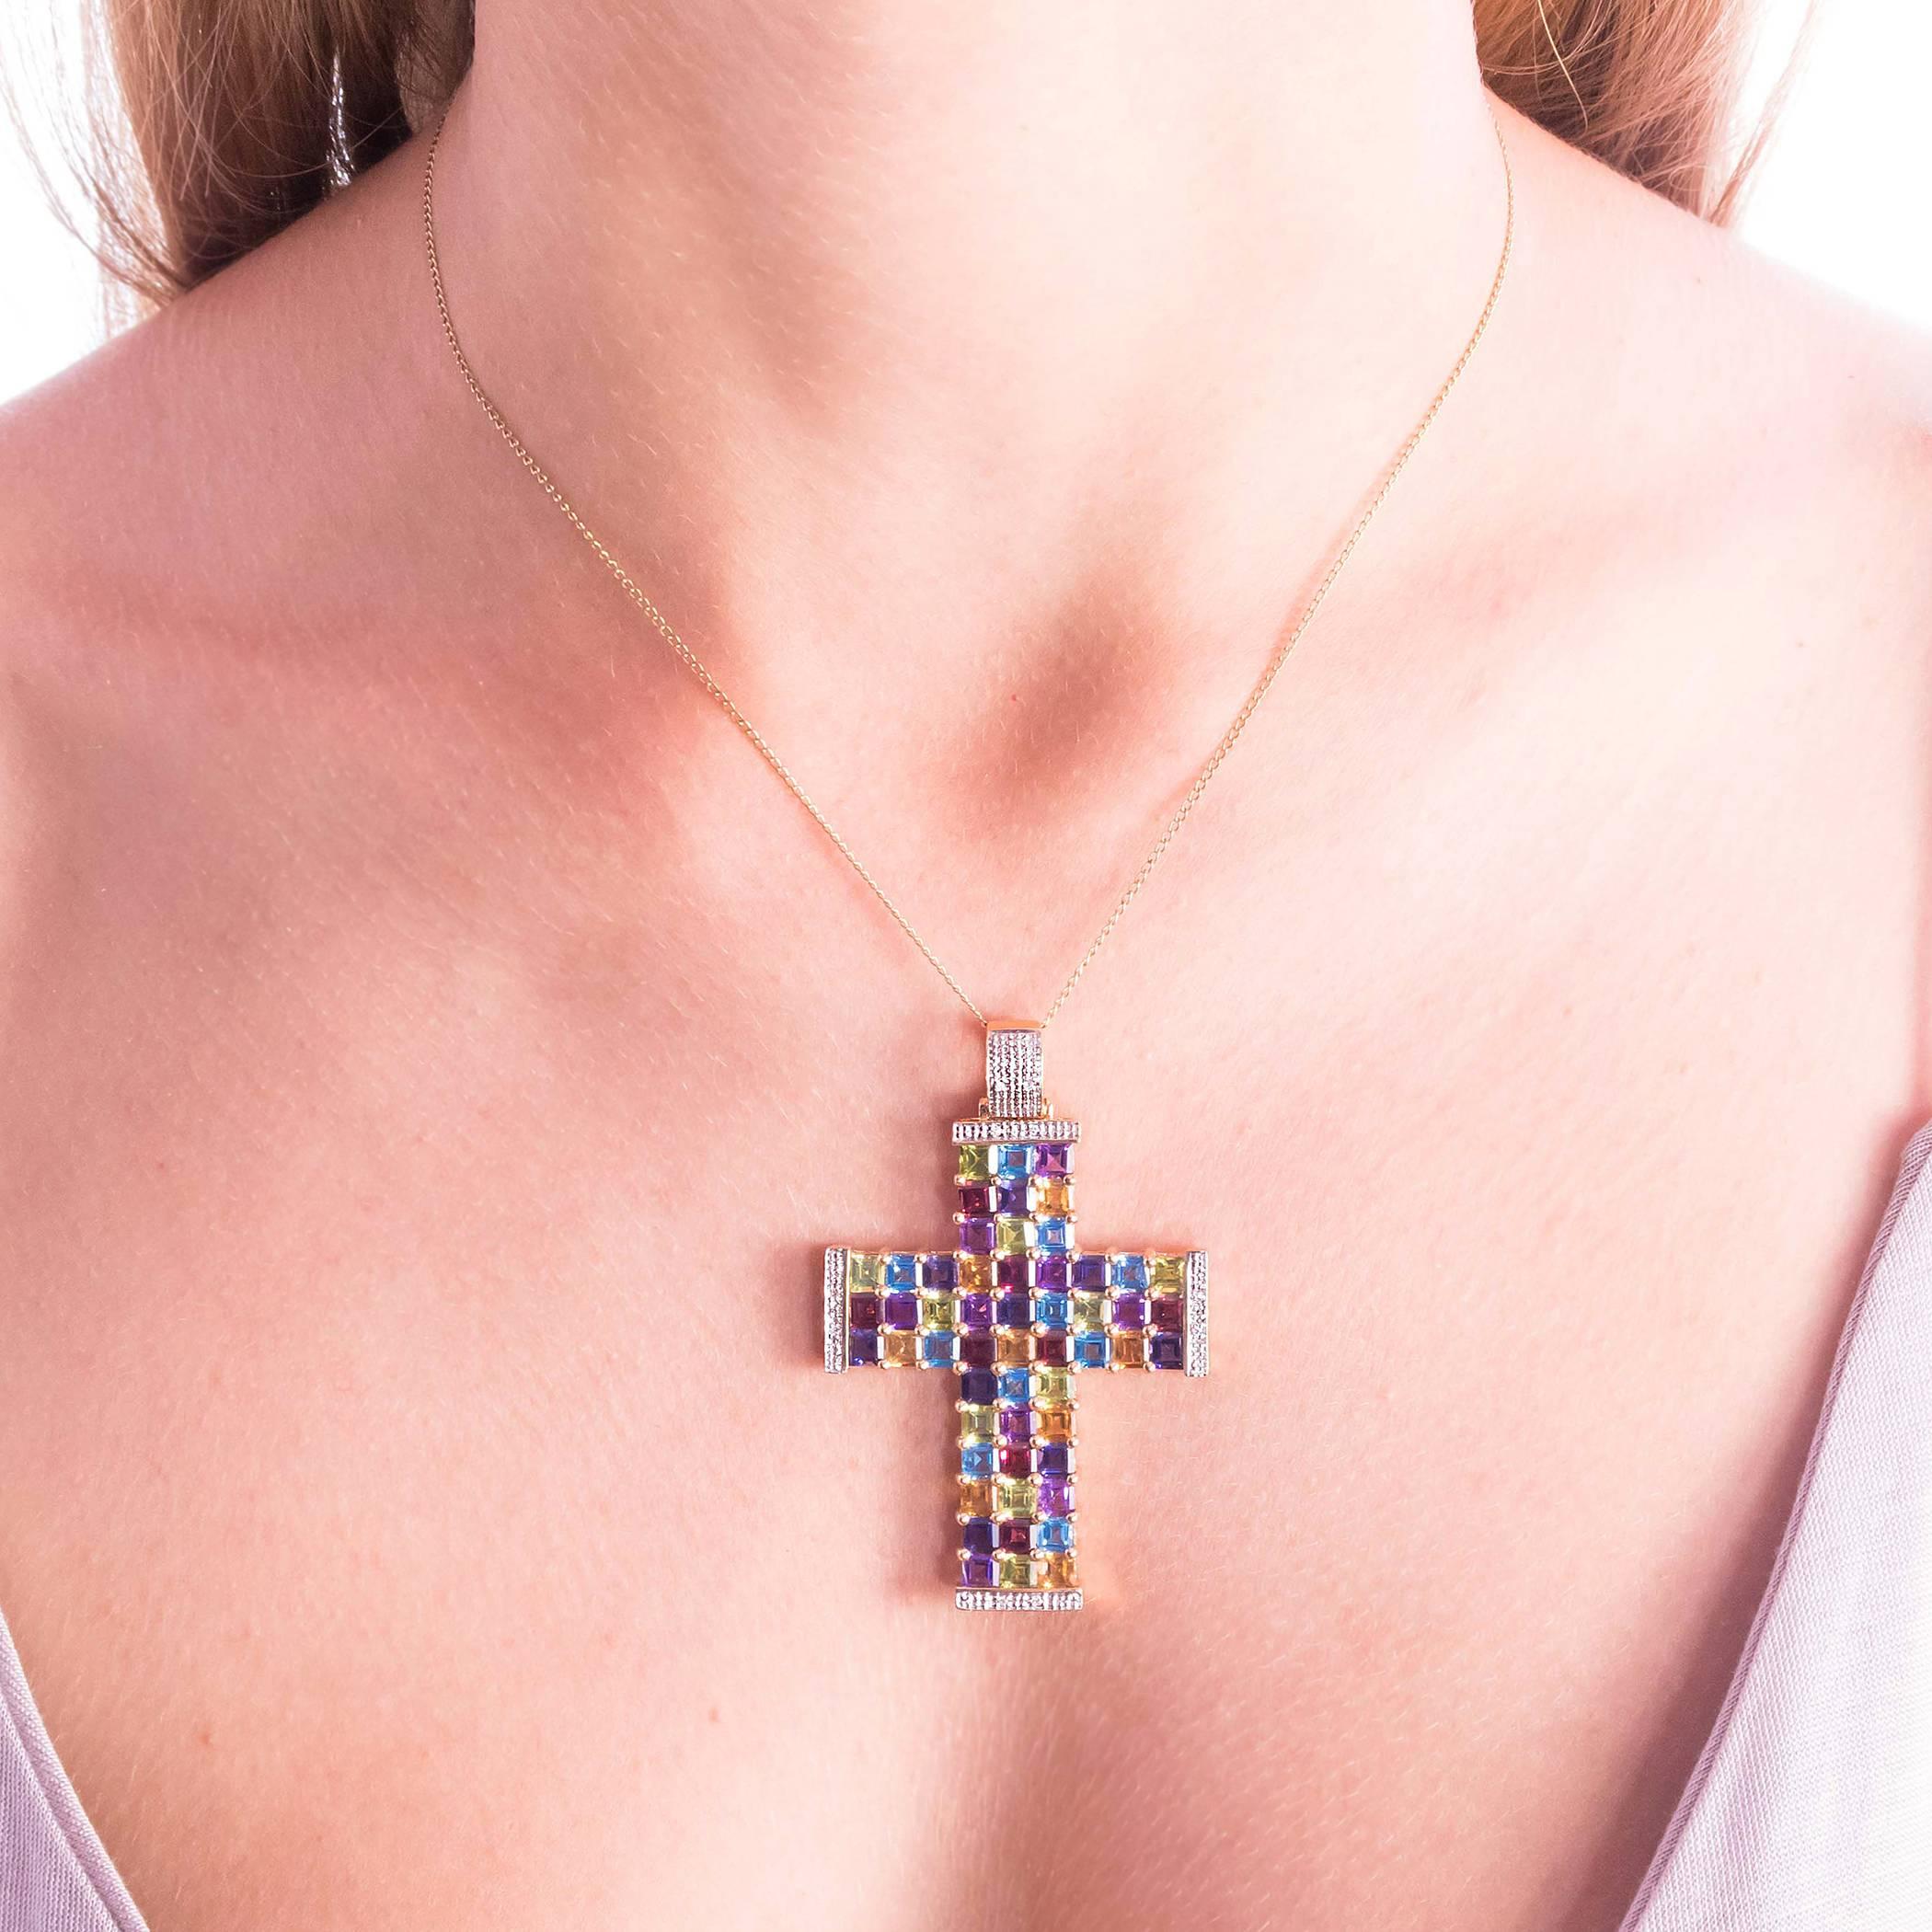 An outstanding Diamond and Multicolor Gemstone Gold Cross Pendant. Set in 14 karat yellow gold is shared claw set with 54 square, 10mm step cut colored gemstones and 10 small, bead set Diamonds in the moveable bale and ends of the Cross.

Colored